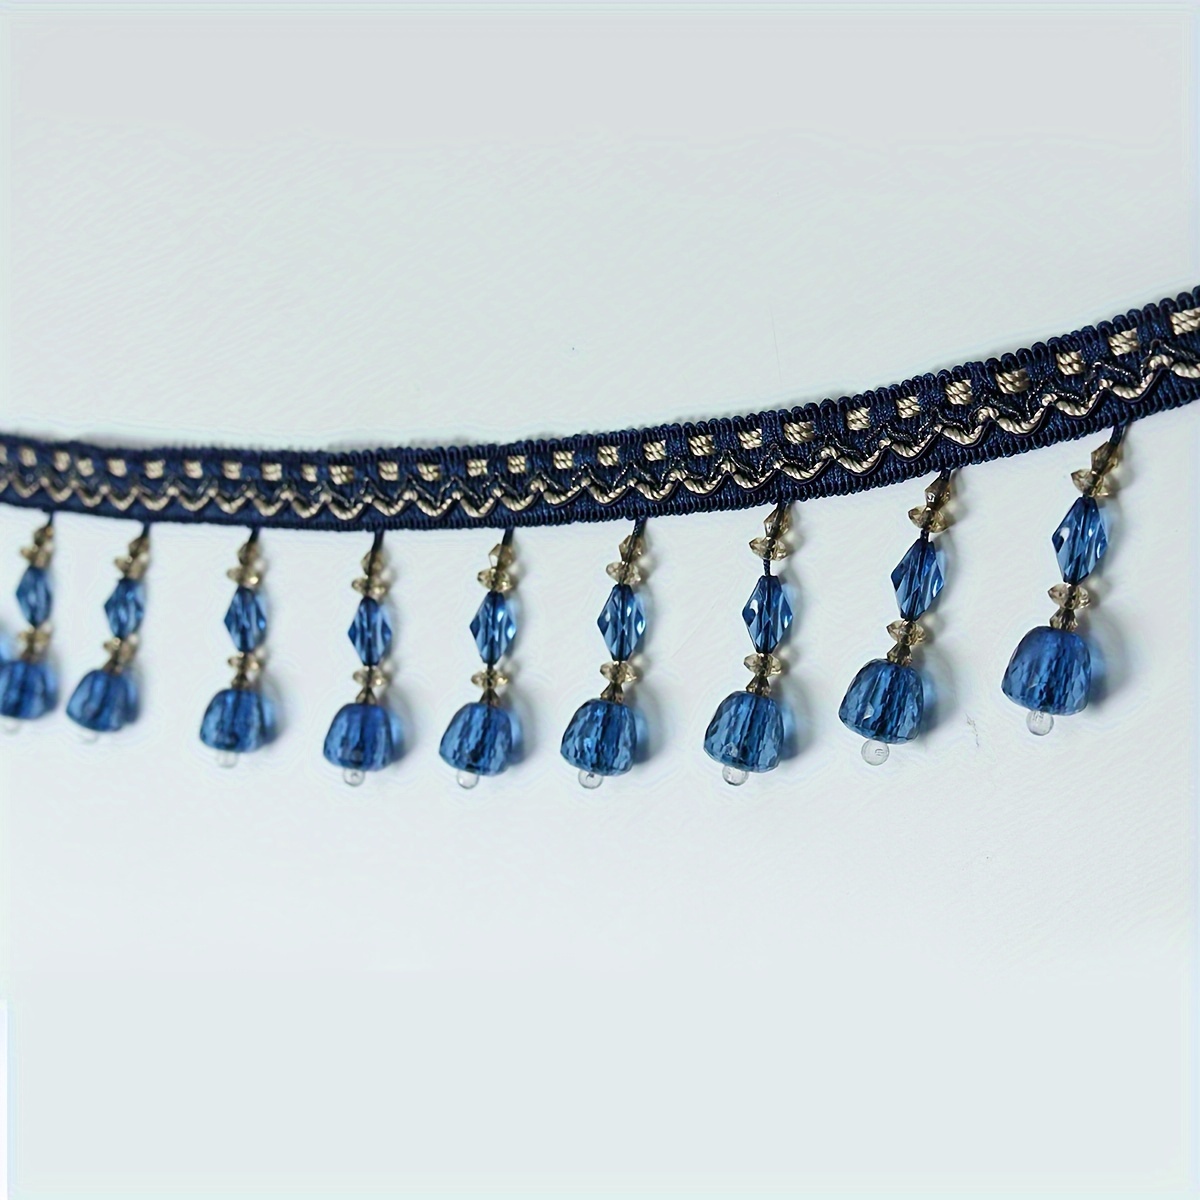 

Sapphire Blue European Curtain Lace Trim With Tassels, 1m/39.37in Wide - Perfect For Diy Sewing & Knitting Projects